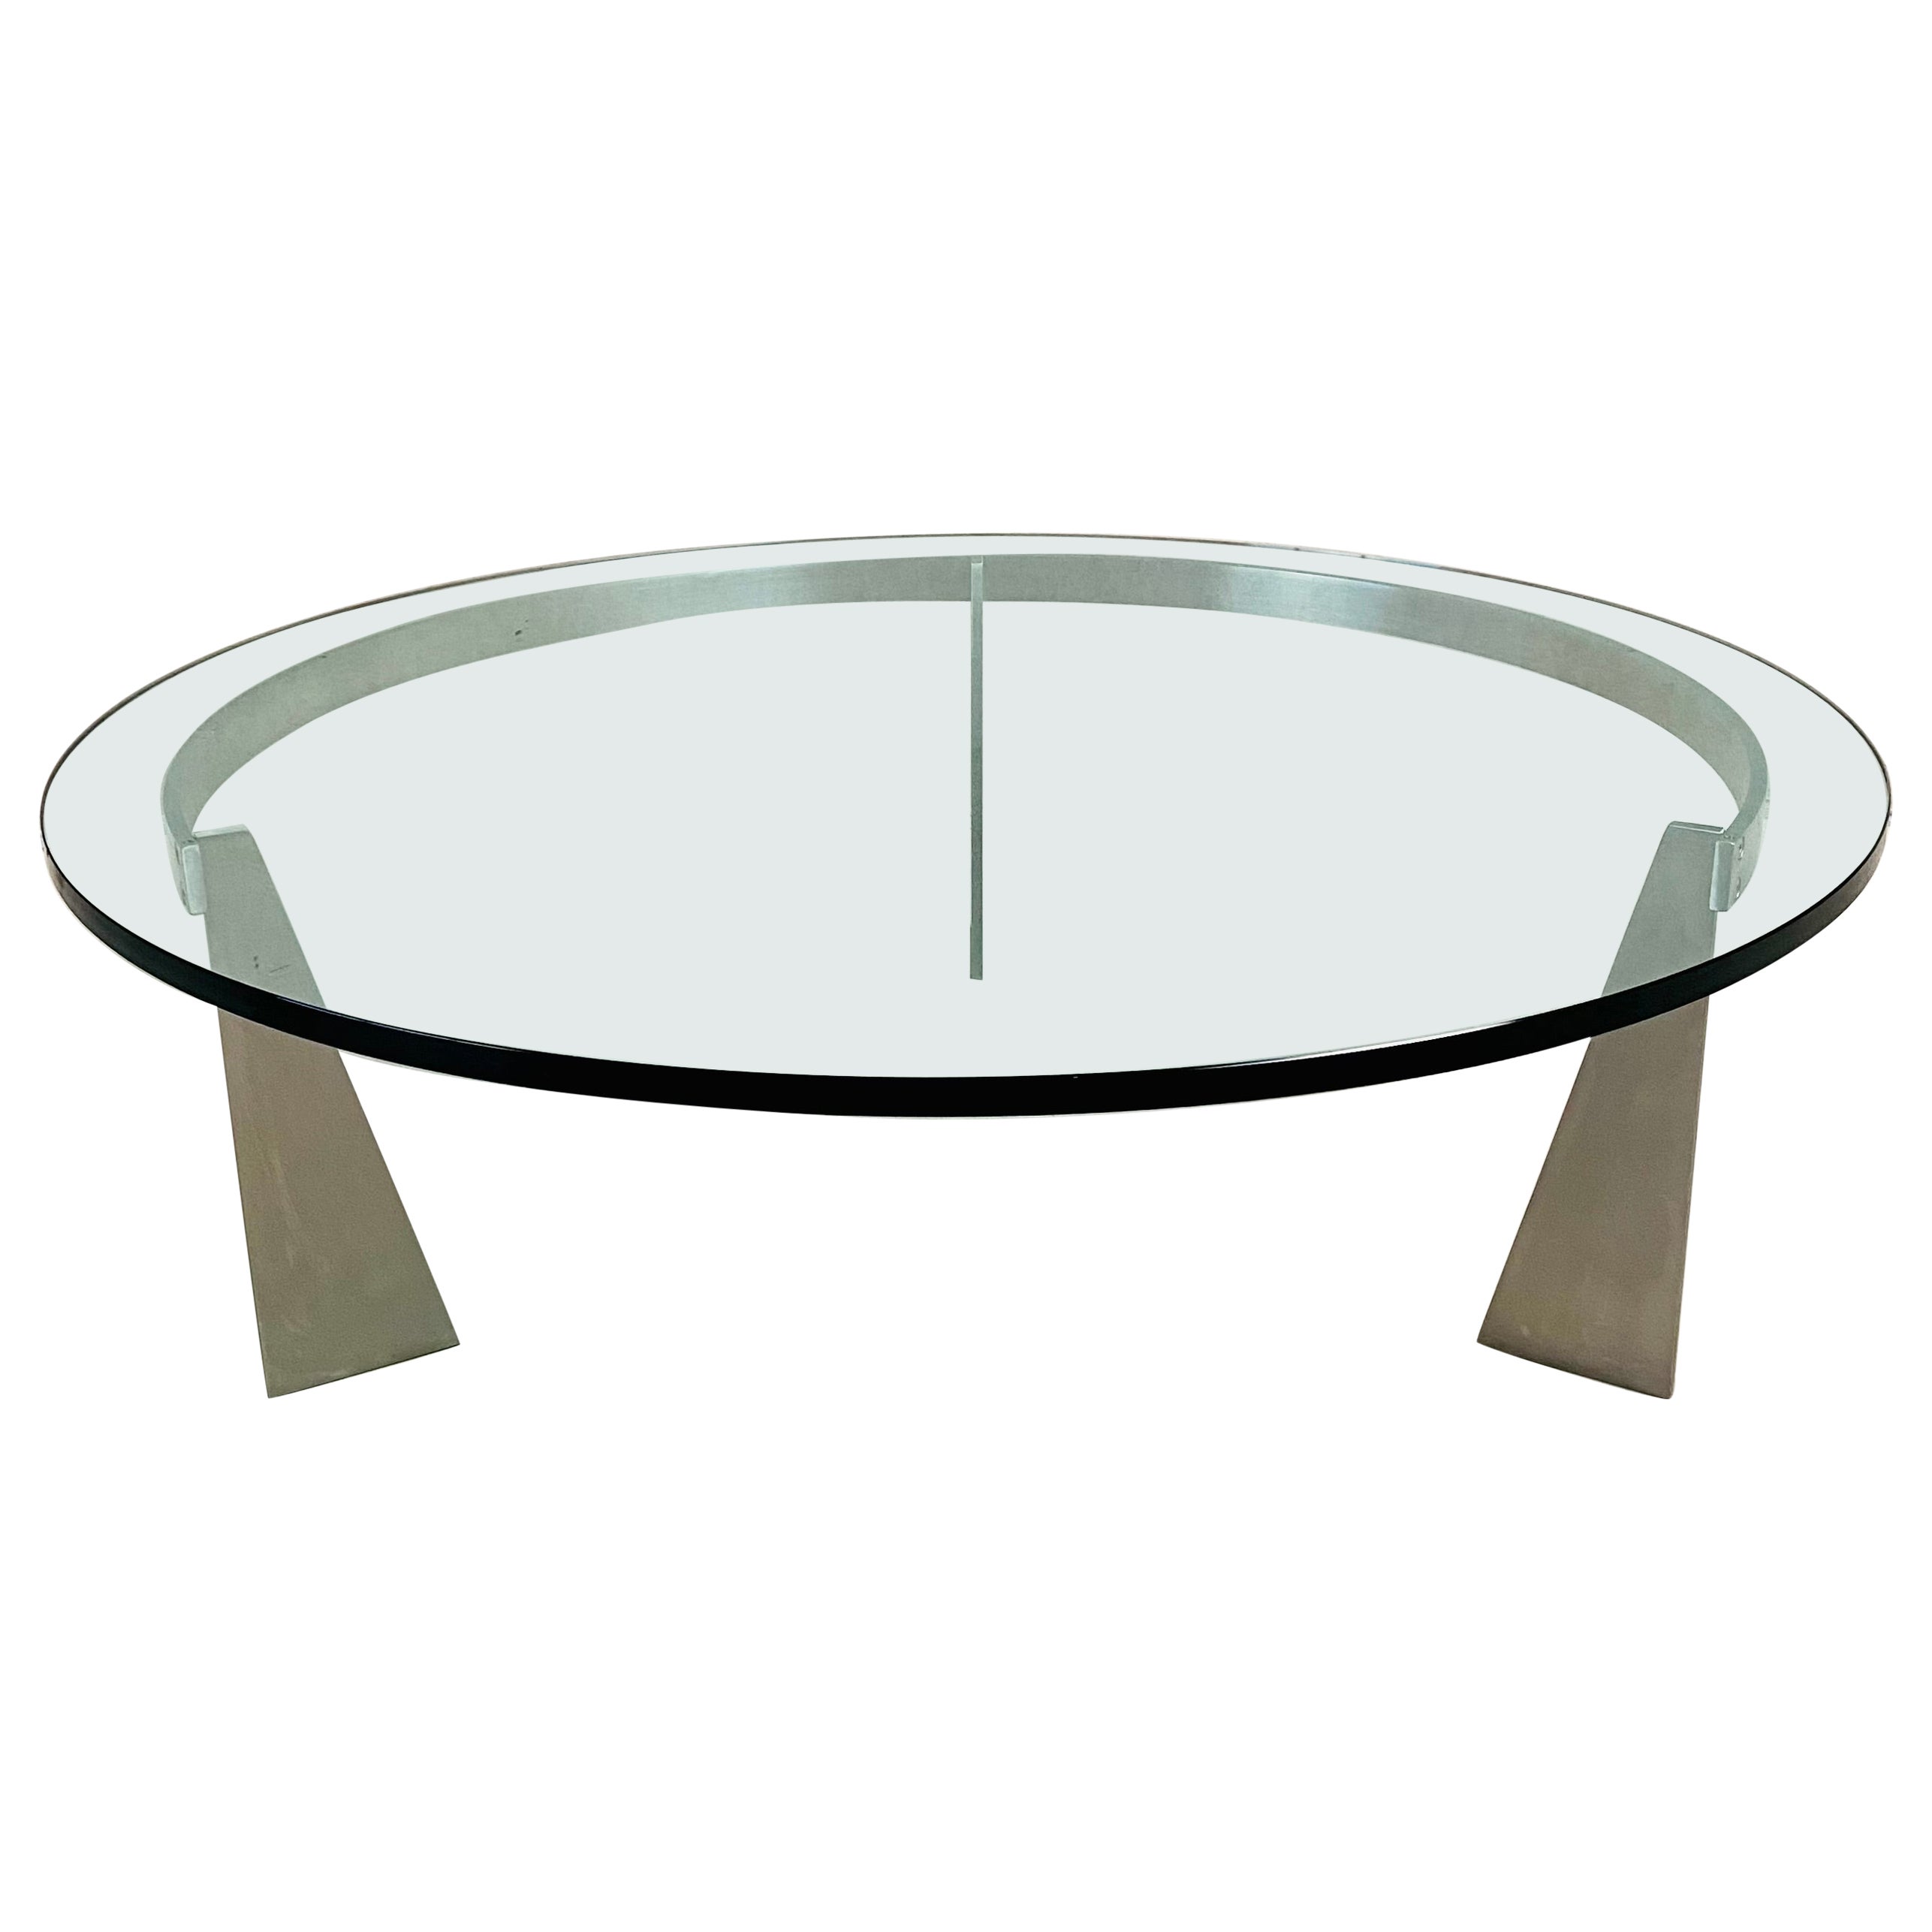 Glass and Steel Coffee Table "G3" by Just Van Beek for Metaform Netherlands 1980 For Sale